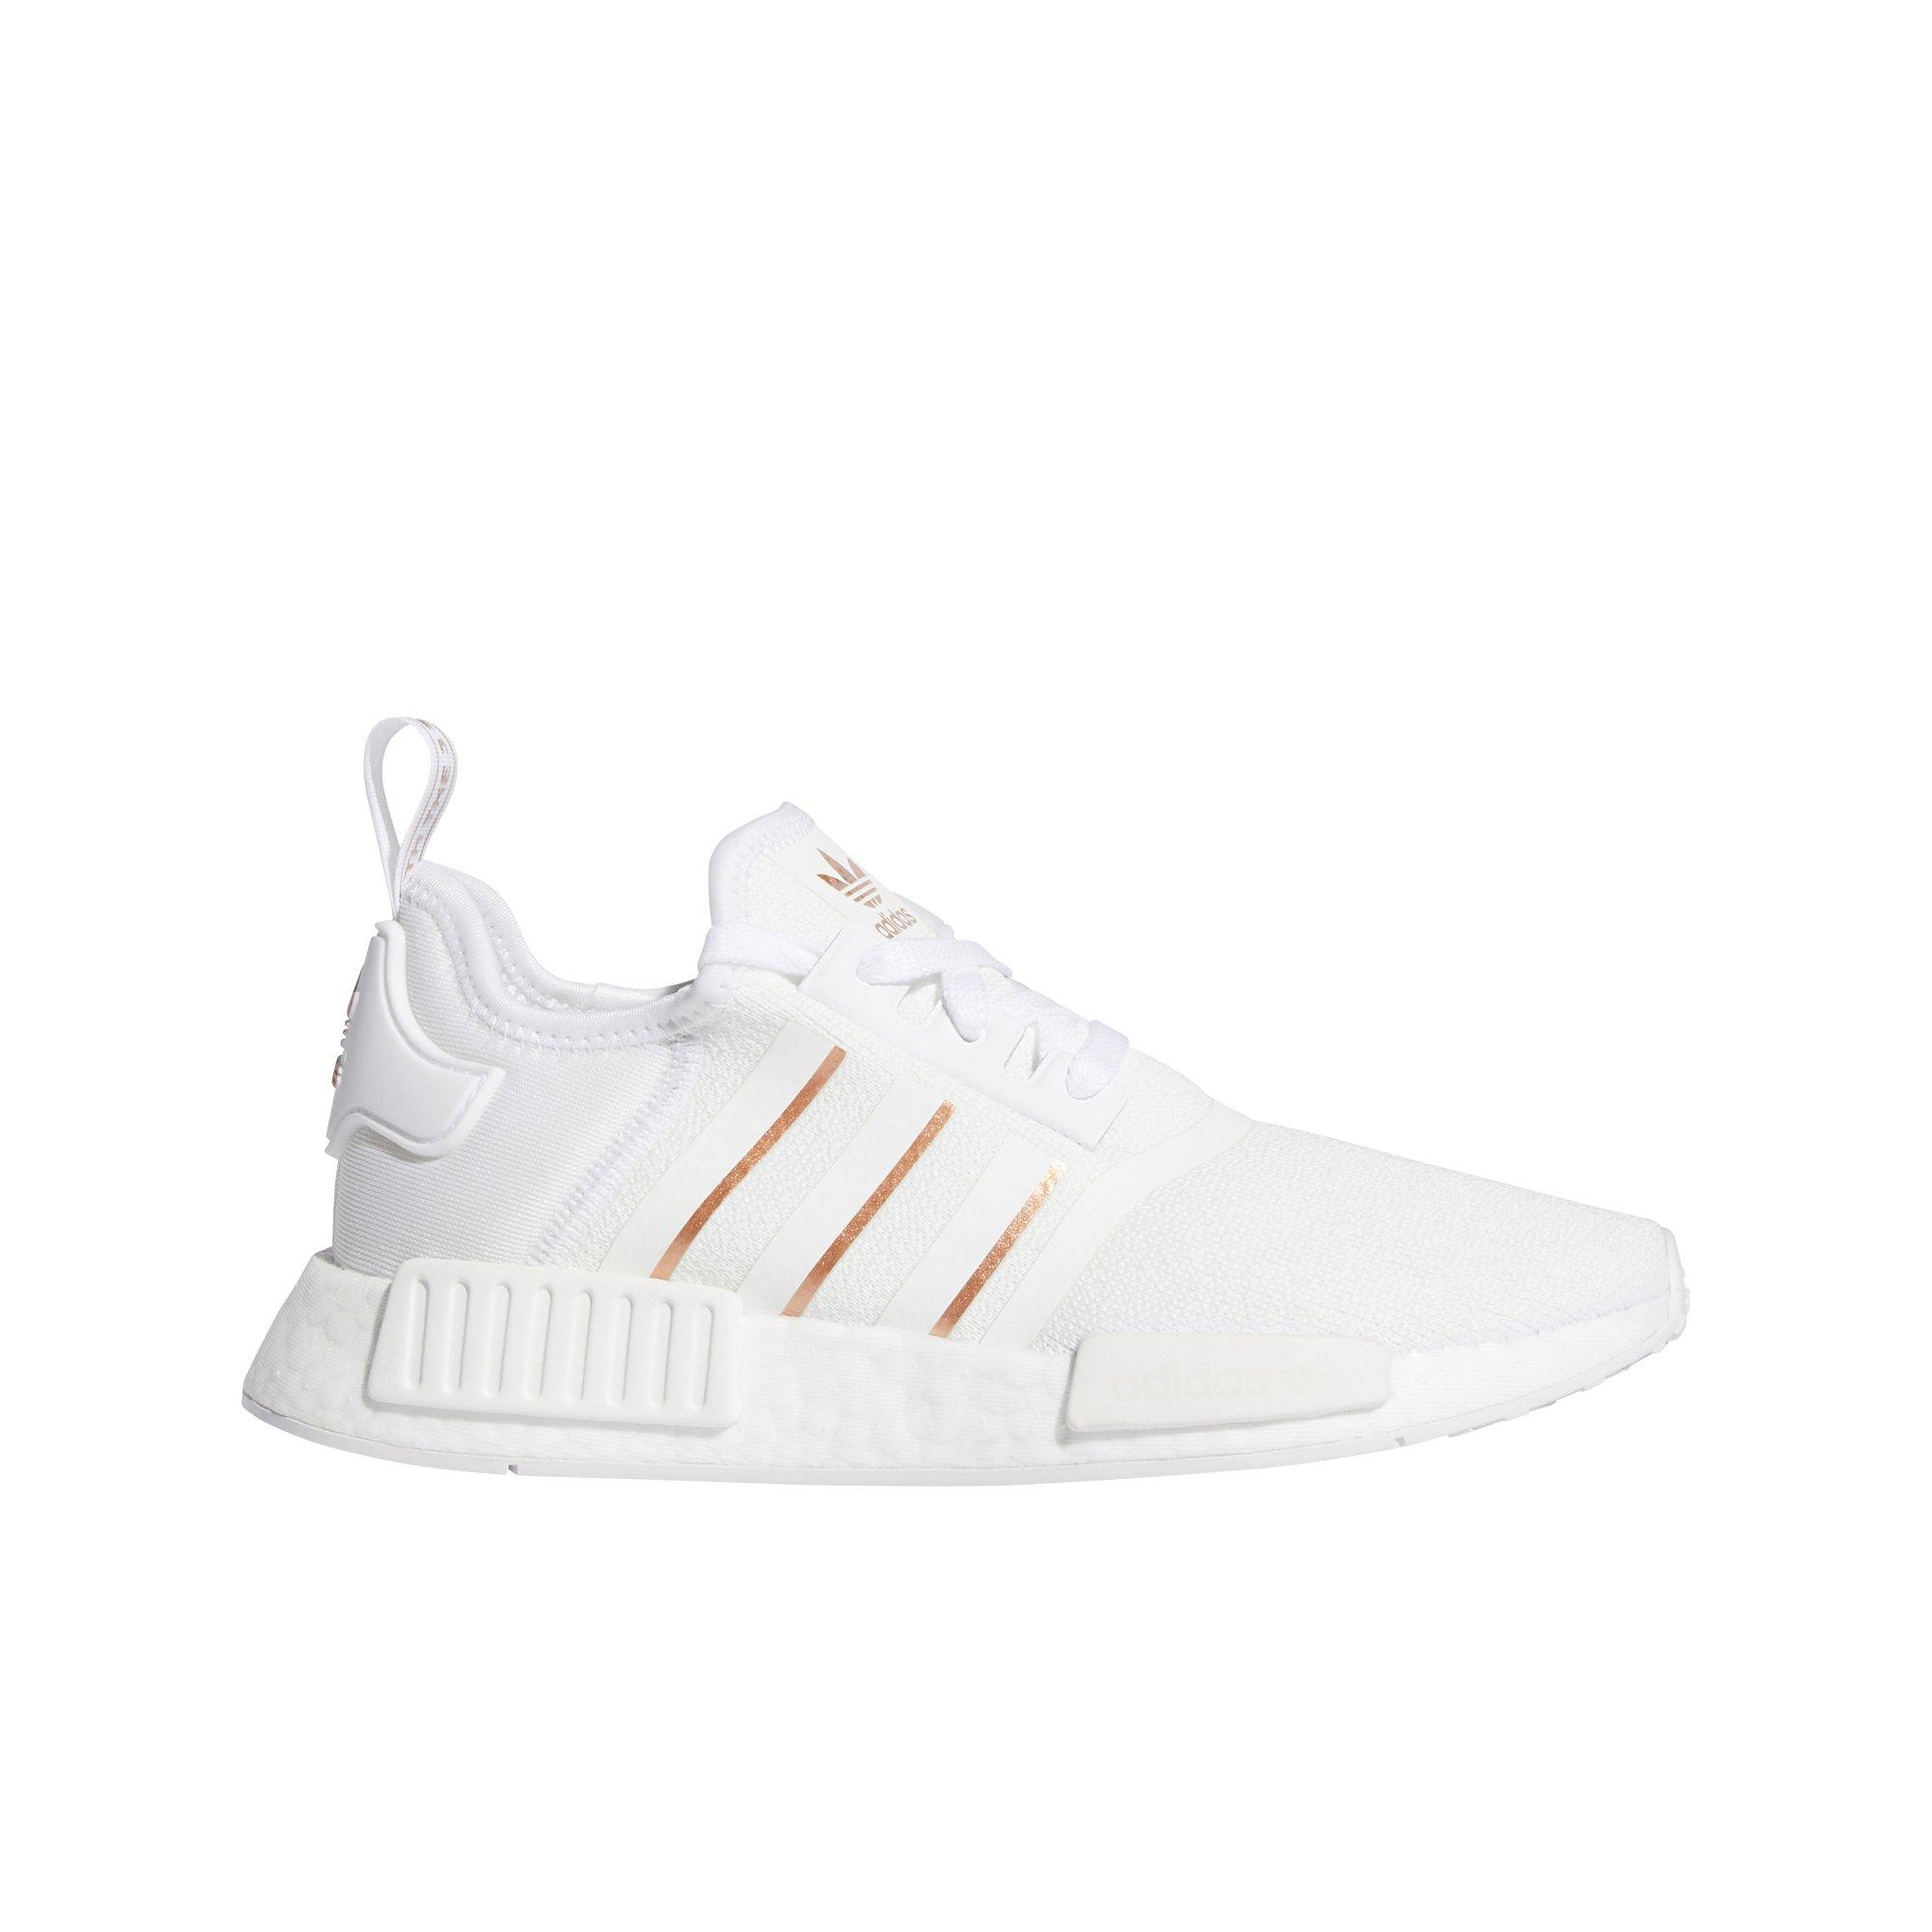 Paradise clumsy Directly adidas NMD_R1 "White/Rose Gold" Women's Shoe - Hibbett | City Gear